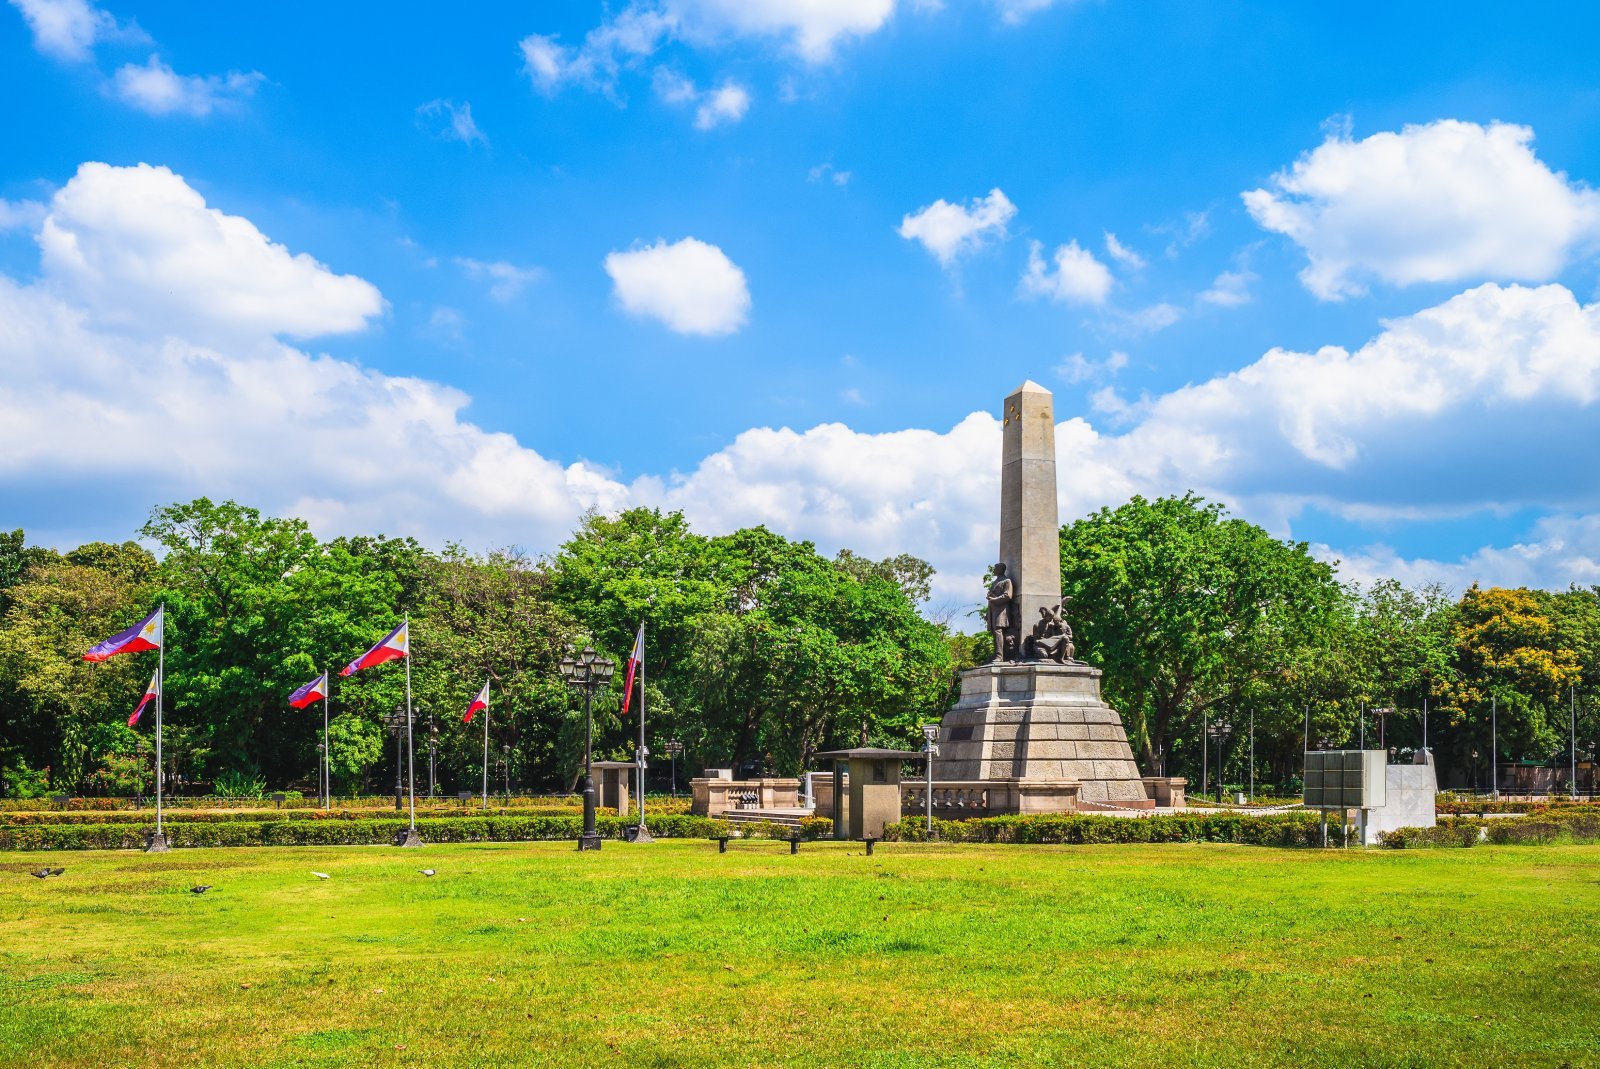 <p class="wp-caption-text">Image Credit: Shutterstock / Richie Chan</p>  <p><span>Rizal Park, named after the Philippine national hero Dr. José Rizal, is an oasis in the heart of Manila. It serves as a venue for leisure, exercise, and cultural events, with beautifully landscaped gardens, historical markers, and monuments. Adjacent to the park is the National Museum complex, comprising several buildings dedicated to the arts, natural sciences, and history. The National Museum of Fine Arts, in particular, houses a vast collection of Philippine art, including works by renowned artists such as Juan Luna and Félix Resurrección Hidalgo. The National Museum of Anthropology showcases the country’s rich cultural diversity, with artifacts that span the prehistoric to the colonial periods.</span></p>